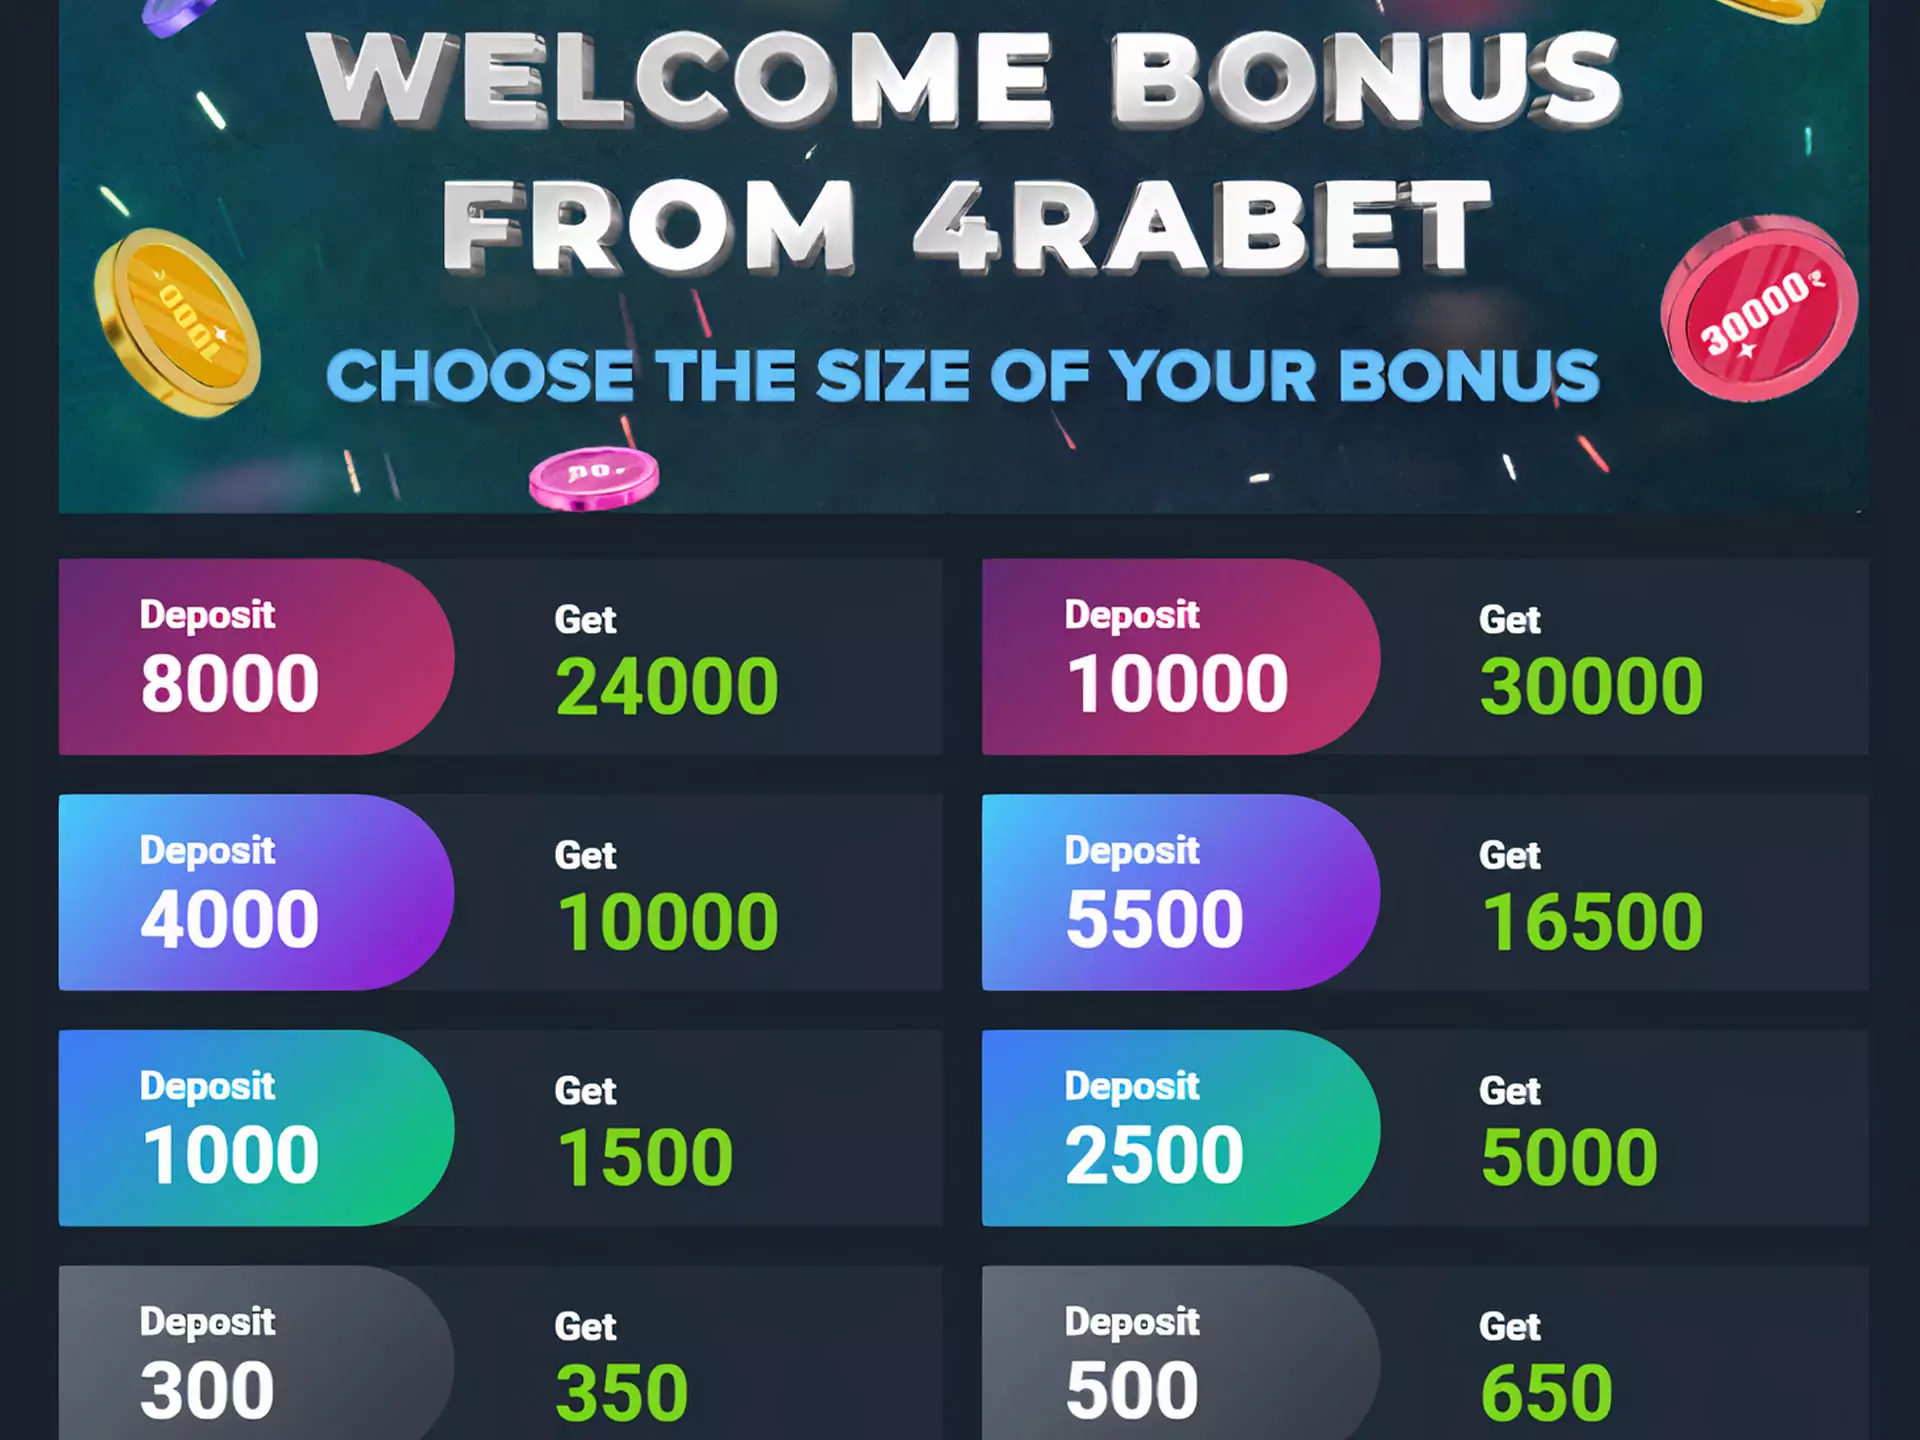 There are a lot of bonuses on deposits for new players at 4rabet.